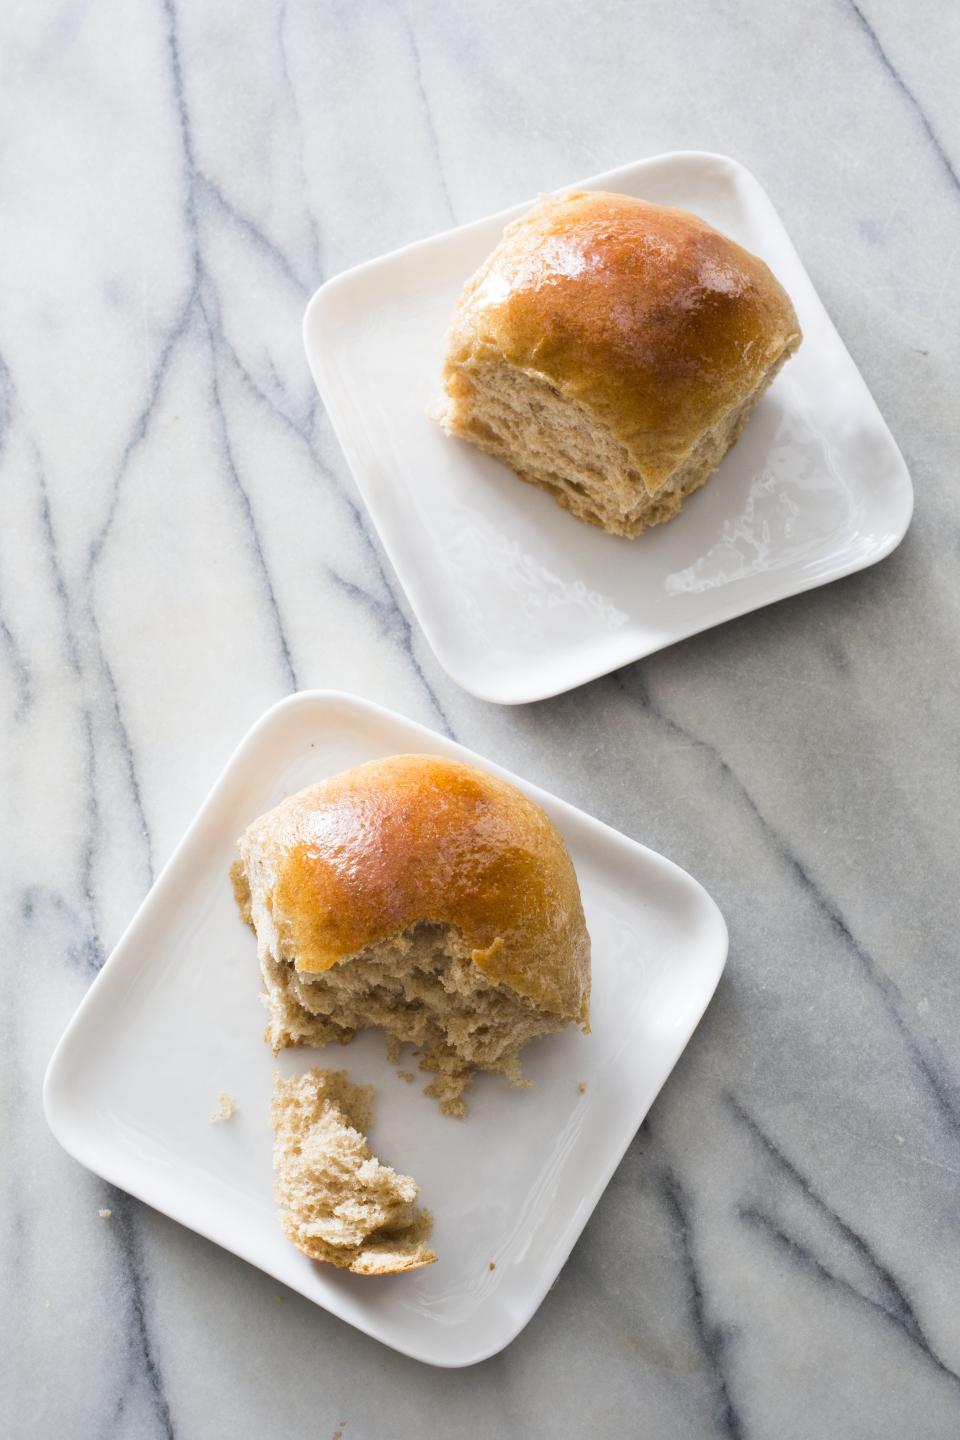 This undated photo provided by America's Test Kitchen in November 2018 shows honey-wheat dinner rolls in Brookline, Mass. This recipe appears in the cookbook "Bread Illustrated." (Carl Tremblay/America's Test Kitchen via AP)